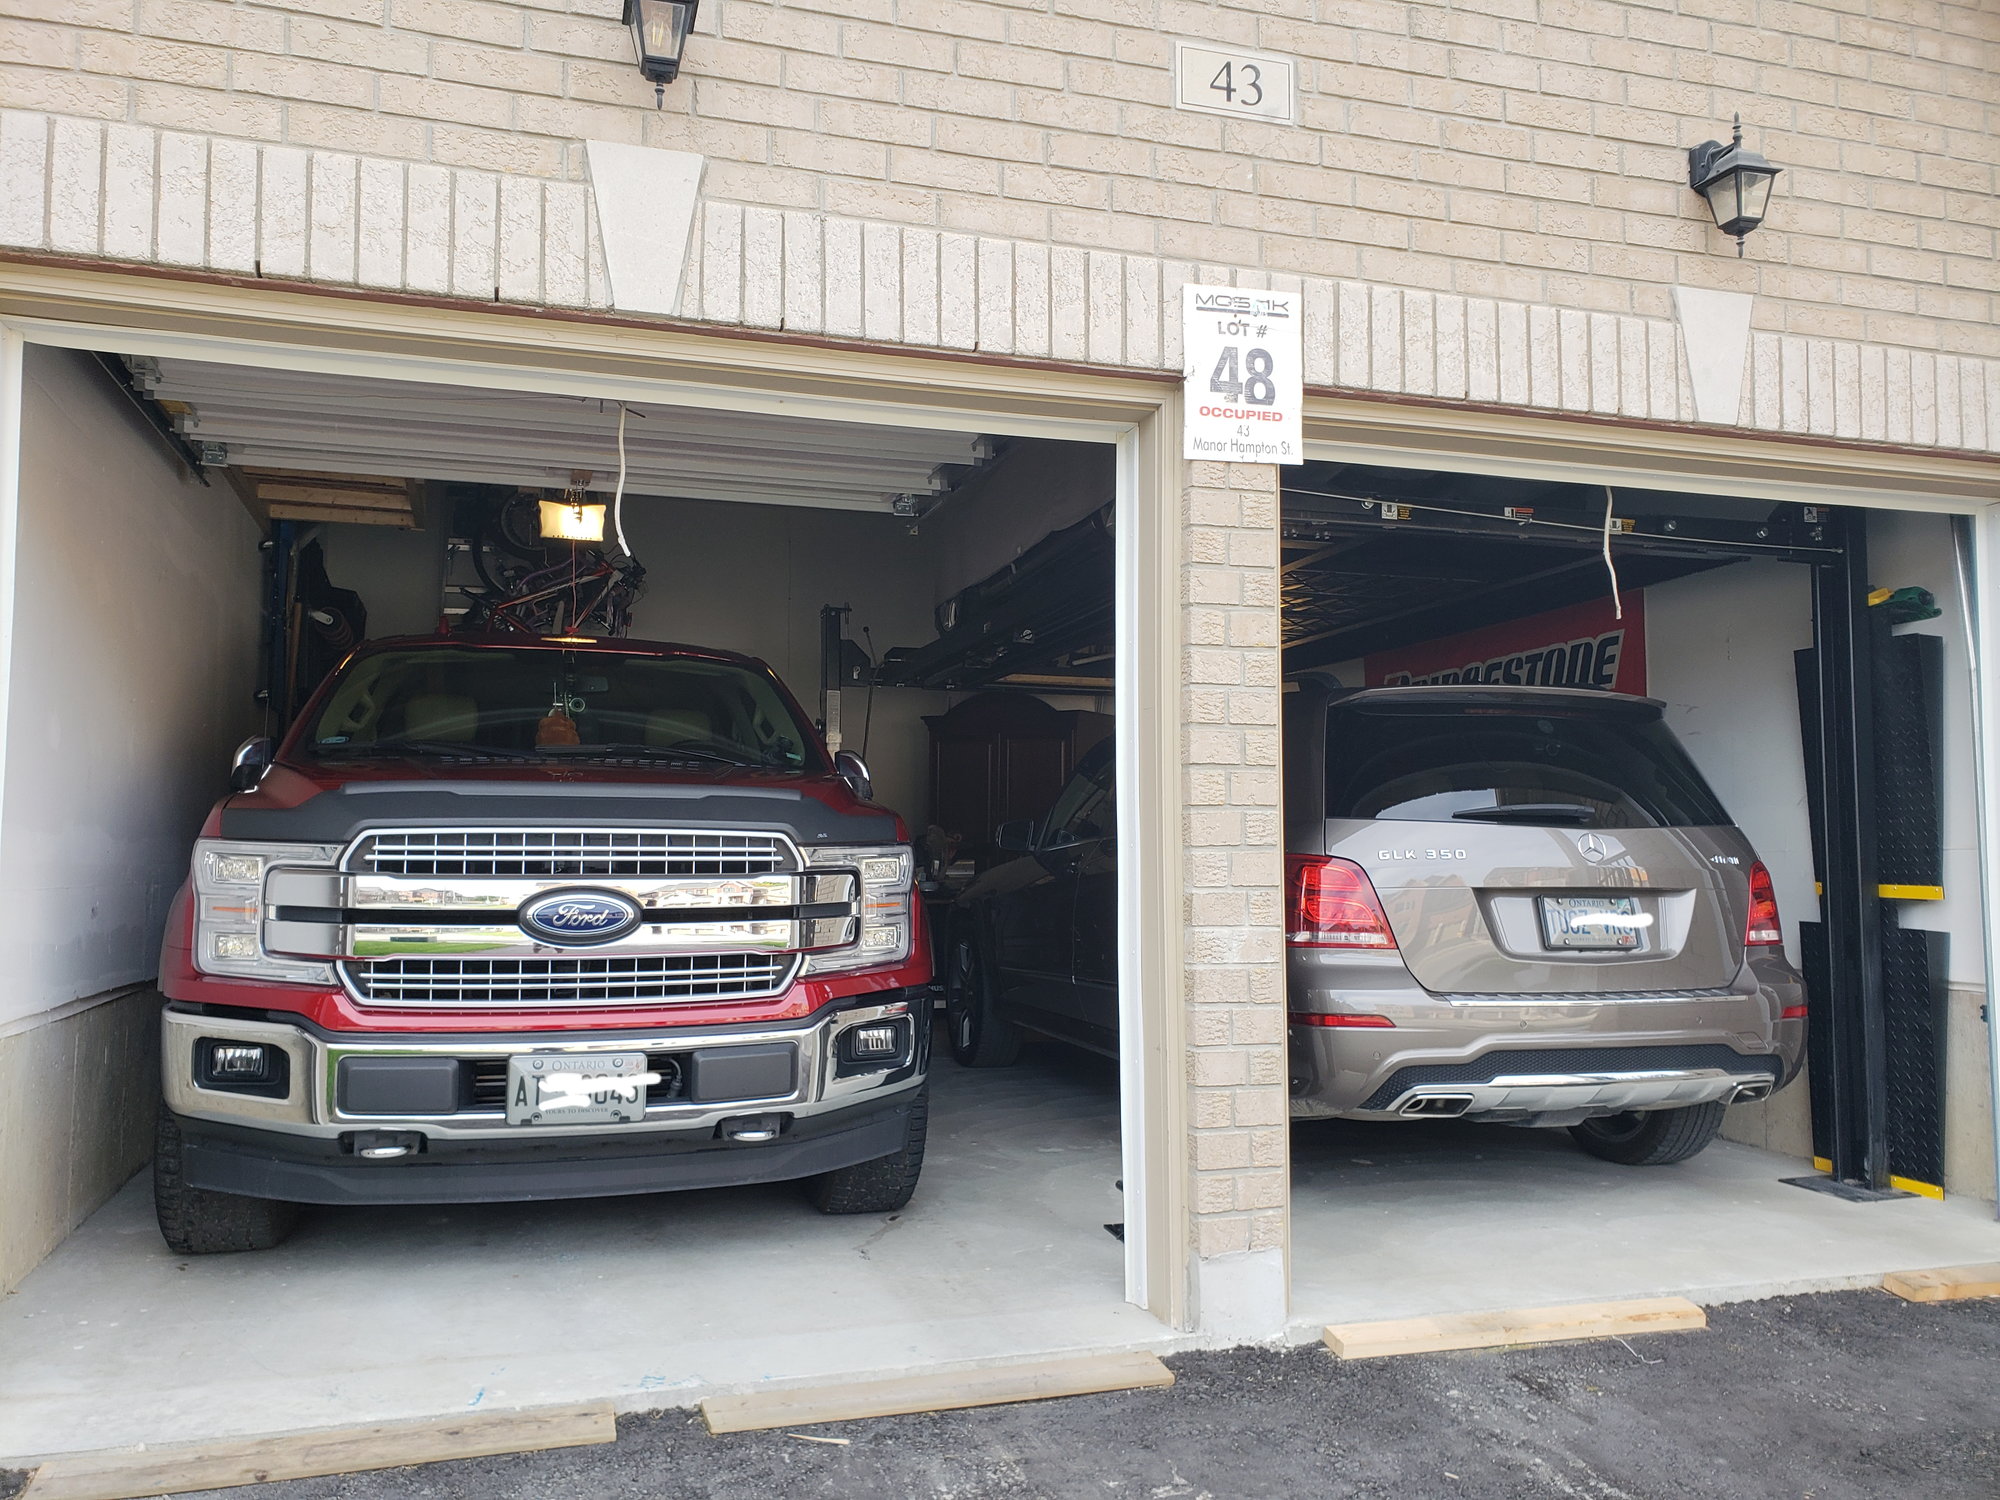 Ford F150 Forum, How Big Of A Garage Do I Need For Truck